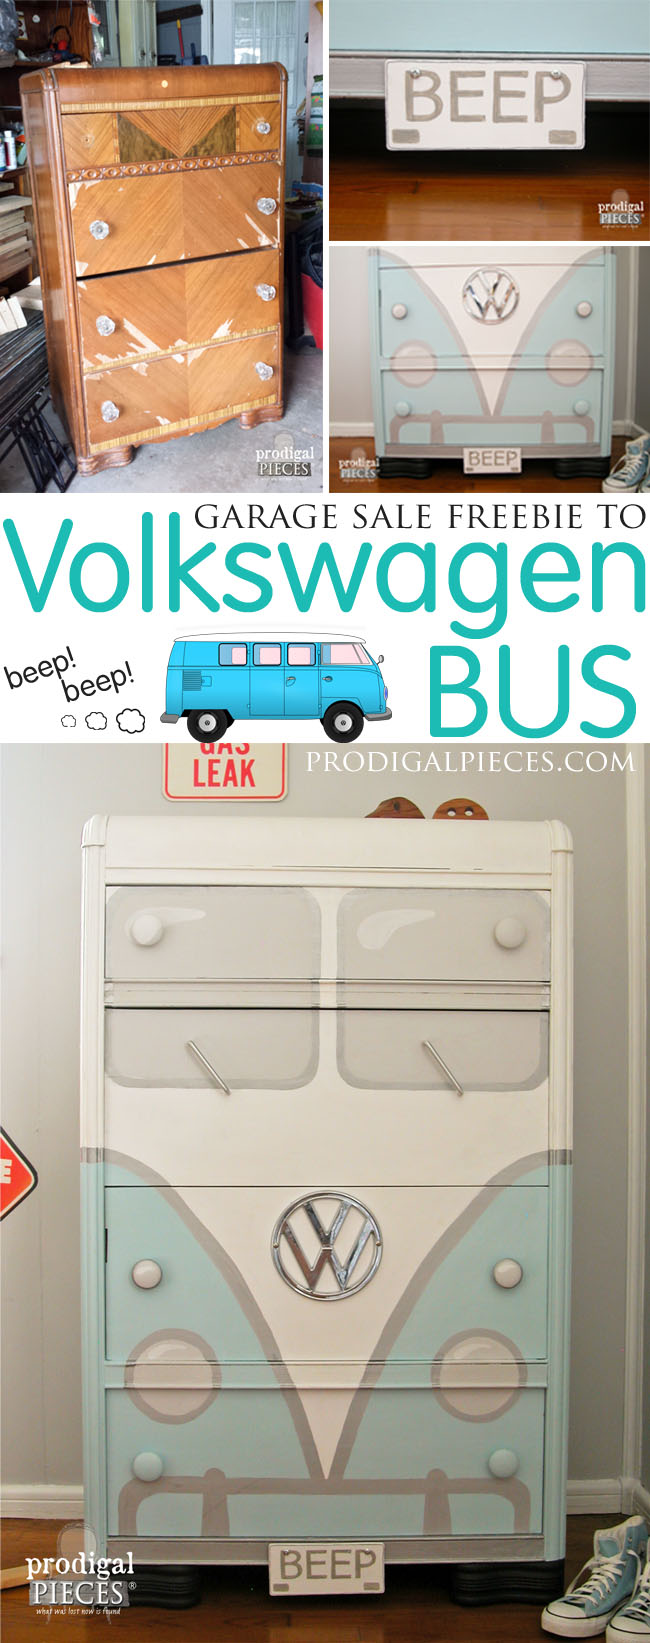 A garage sale freebie Art Deco waterfall chest of drawers gets a sweet Volkswagen Bus makeover by Larissa of Prodigal Pieces | prodigalpieces.com #prodigalpieces #furniture #diy #homedecor